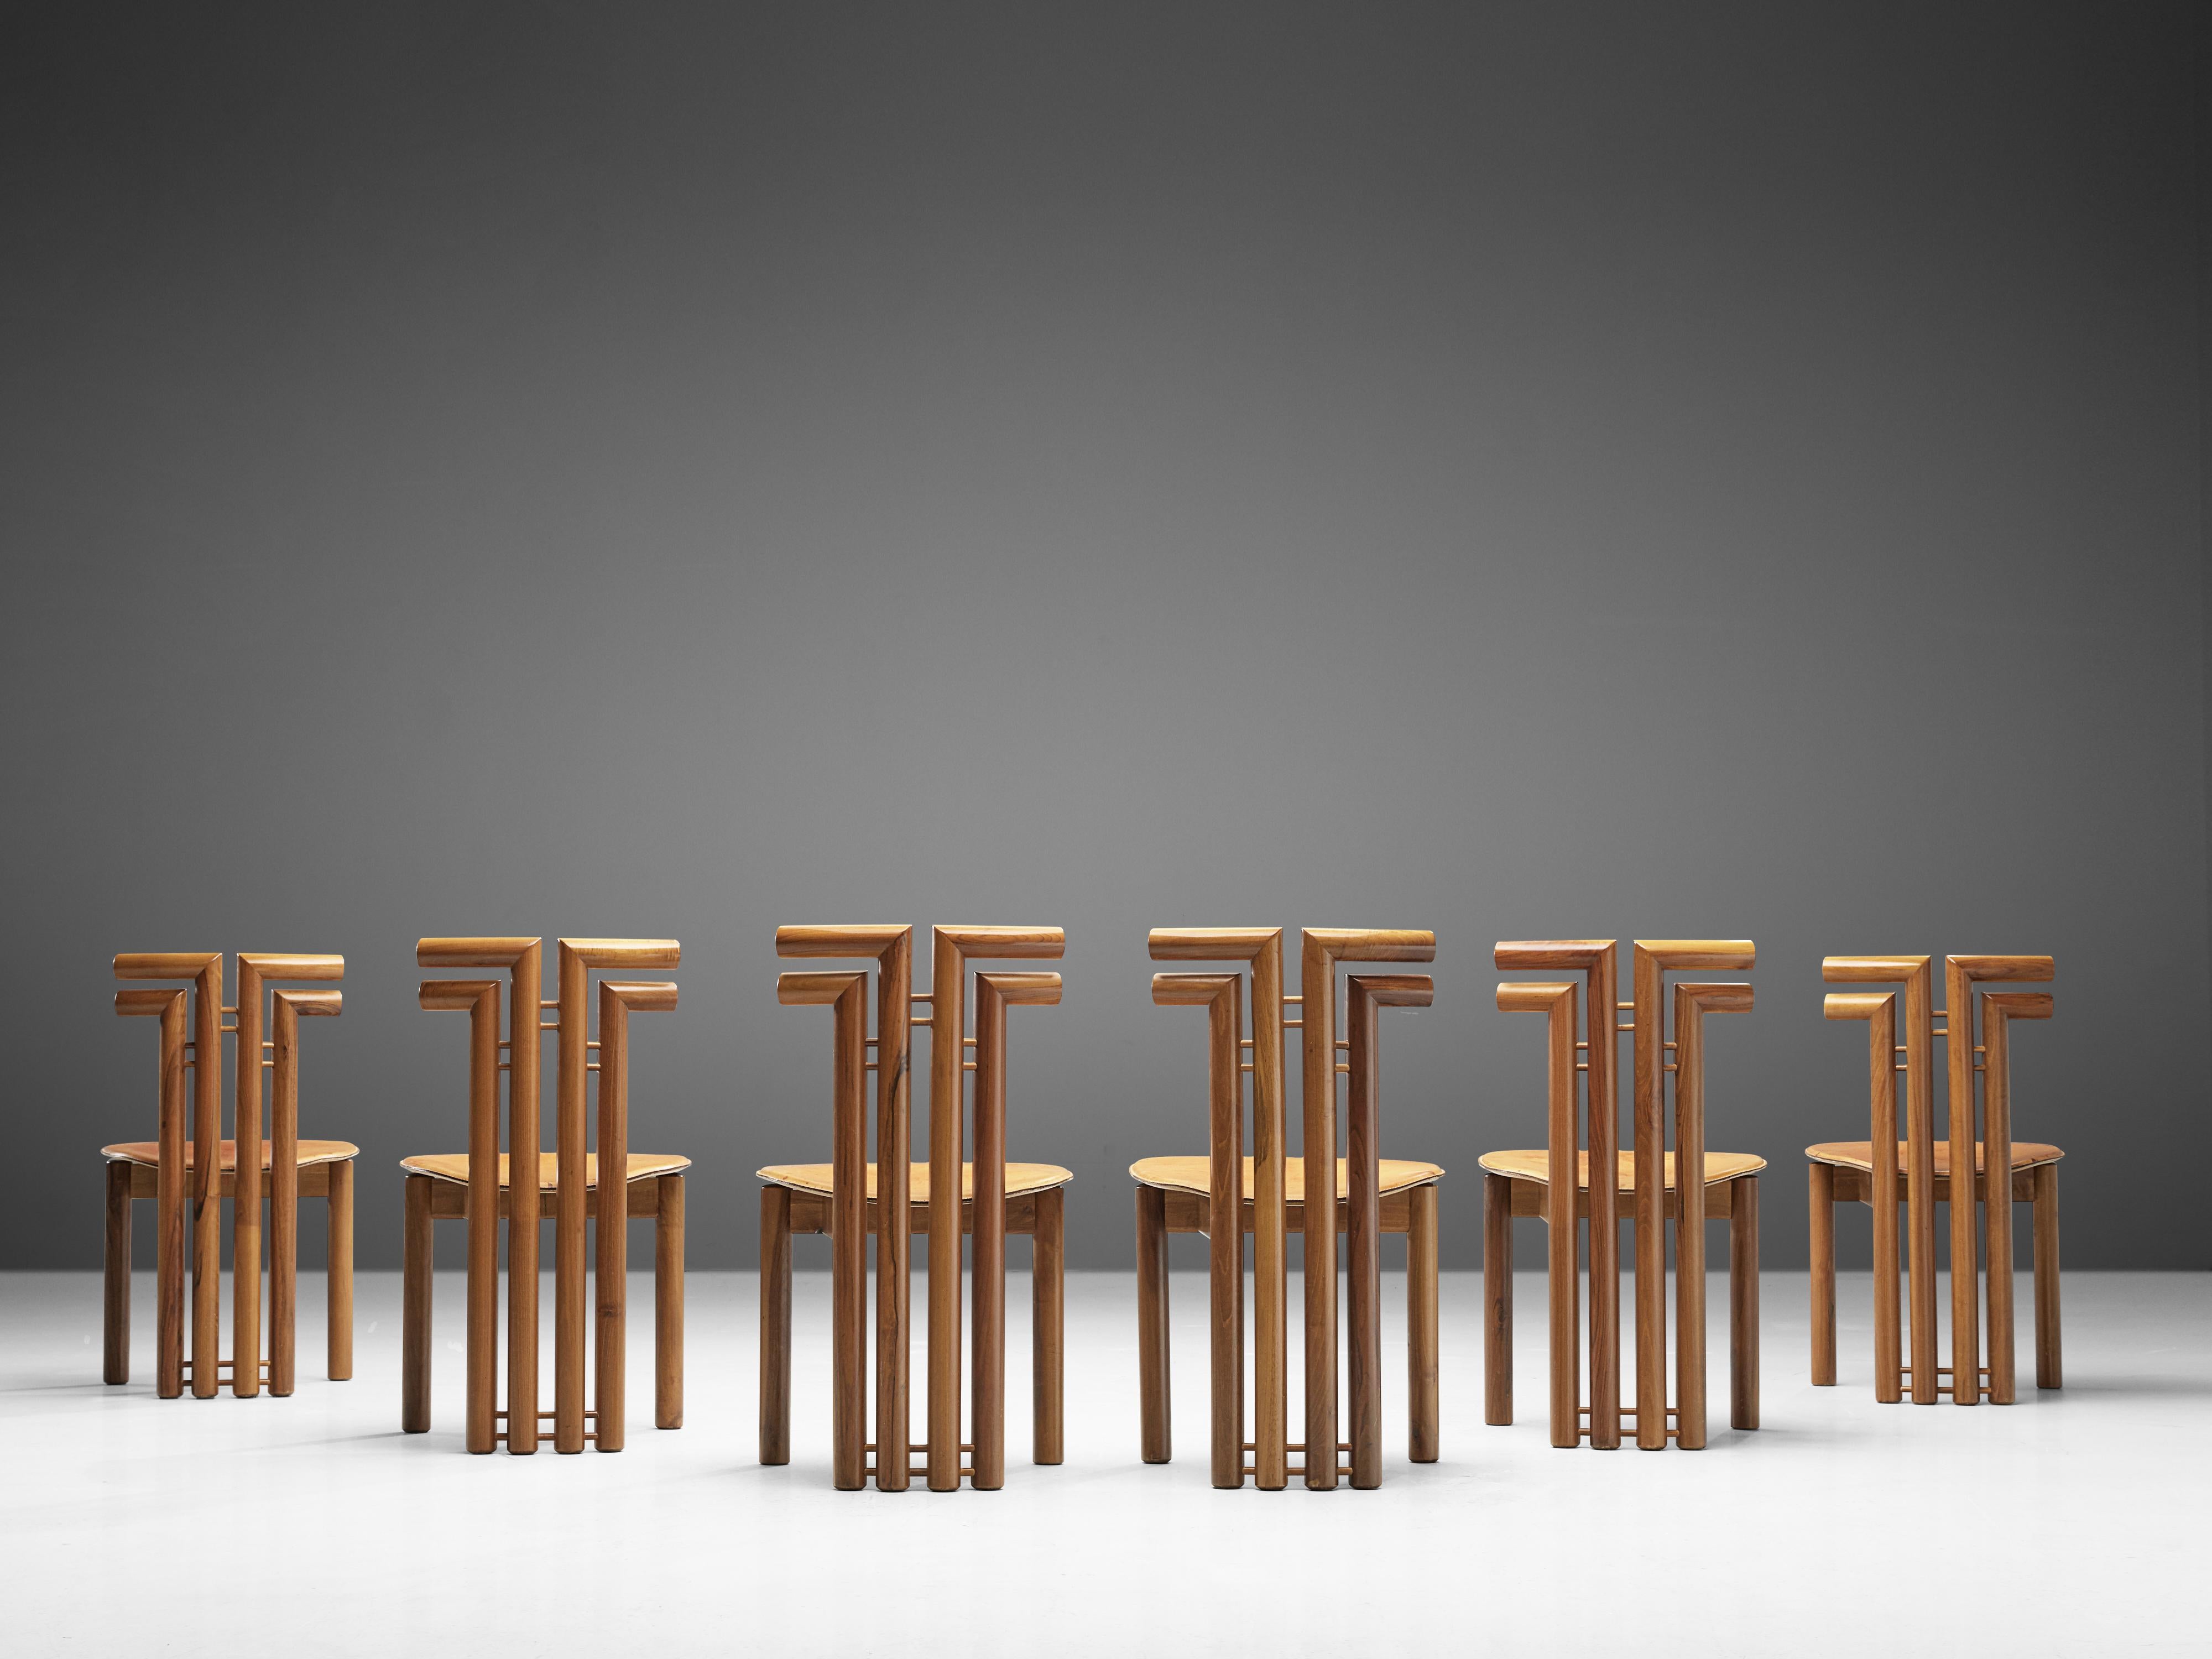 Set of six dining chairs, Italian walnut and cognac leather, Italy, 1970s

Set of six sculptural chairs that feature wonderful backrests, consisting of four round pillar like chair legs that fan out to the side, which creates a sculptural